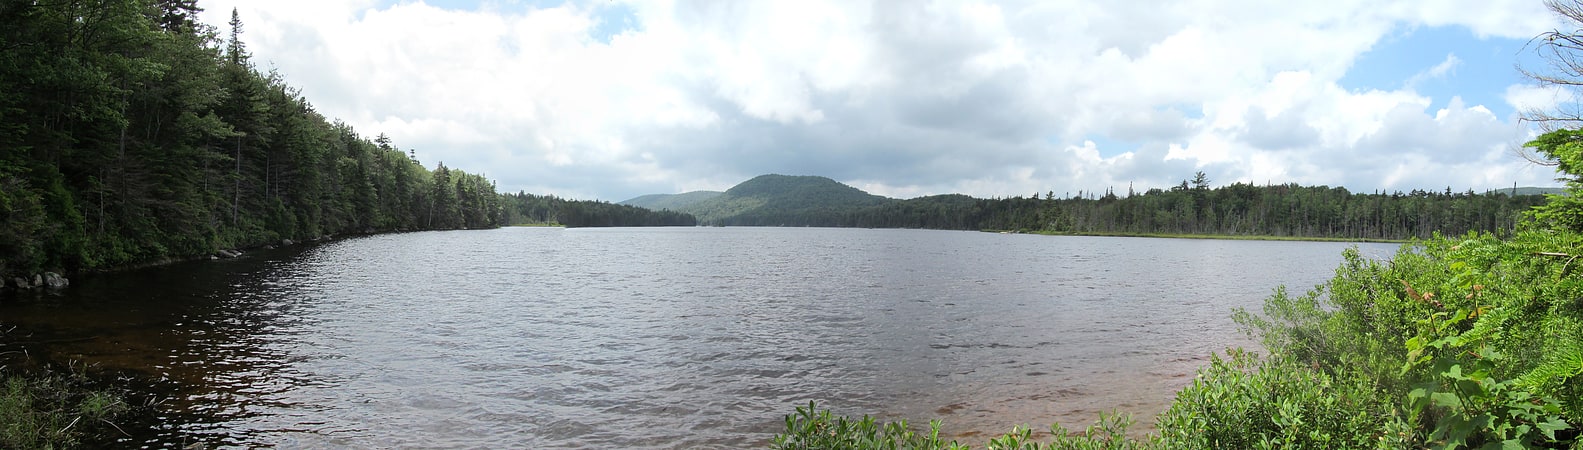 Lake in New York State